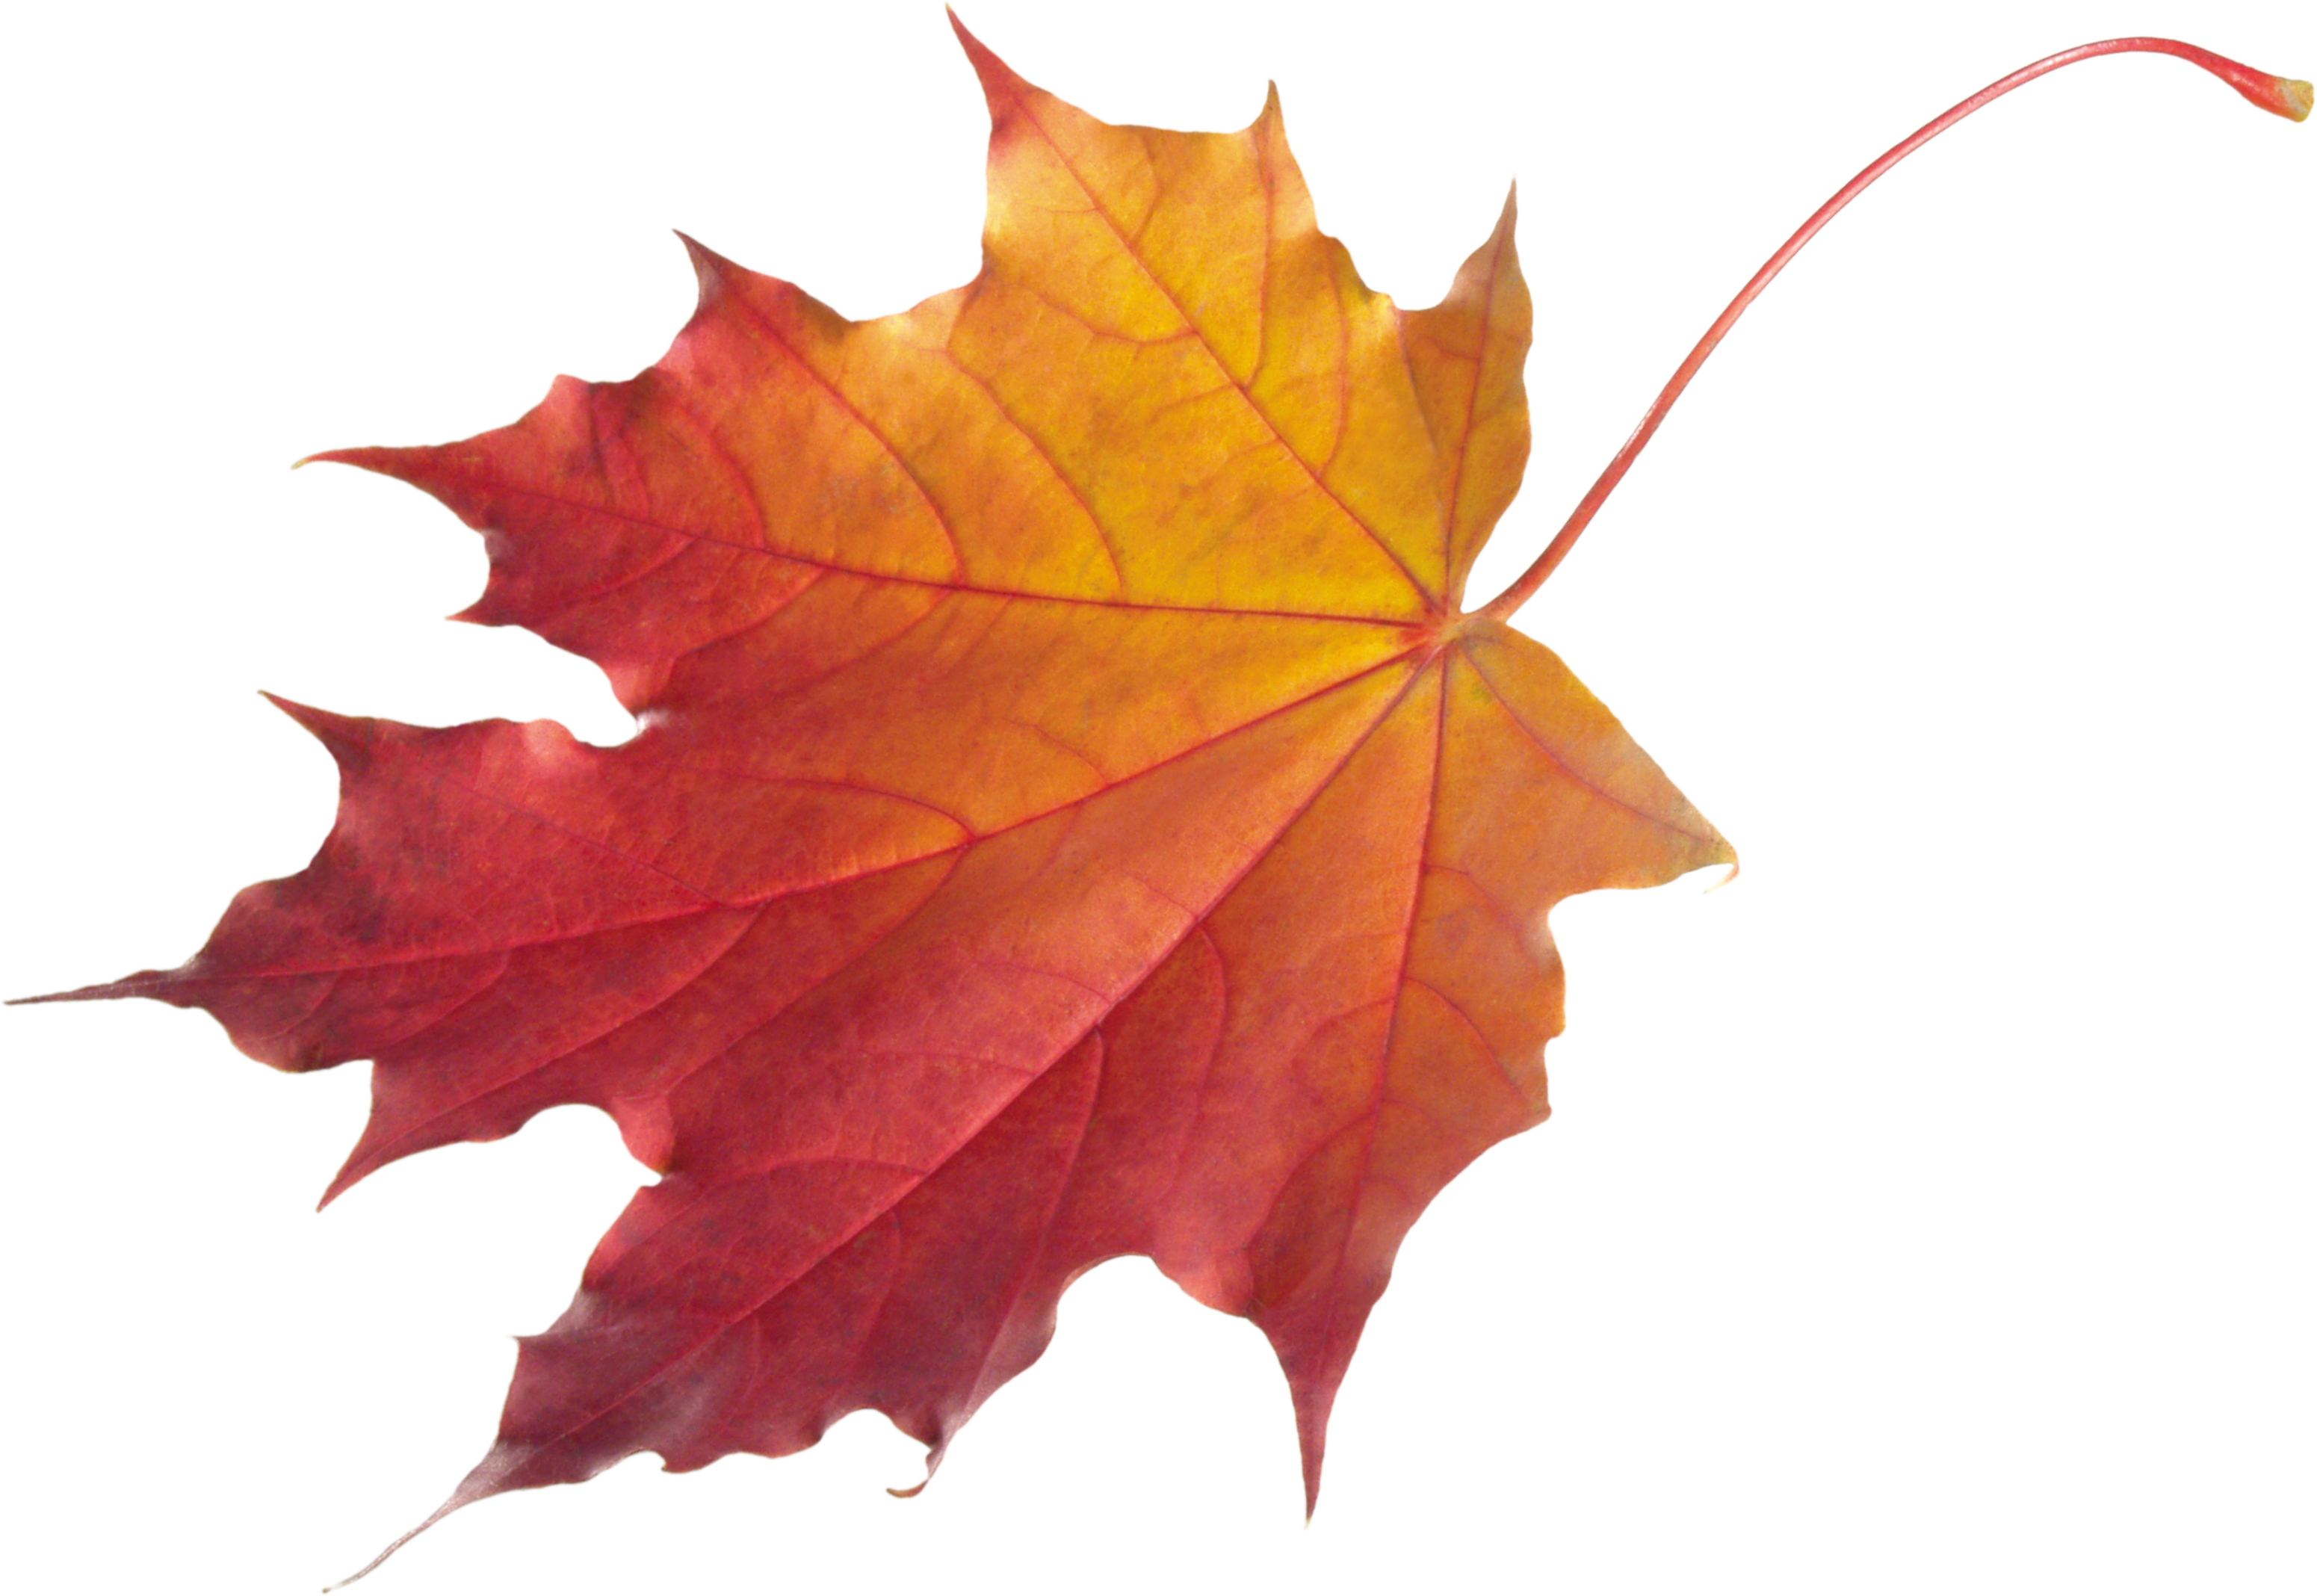 Autumn Leaves HD PNG Transparent Autumn Leaves HD.PNG Images. | PlusPNG